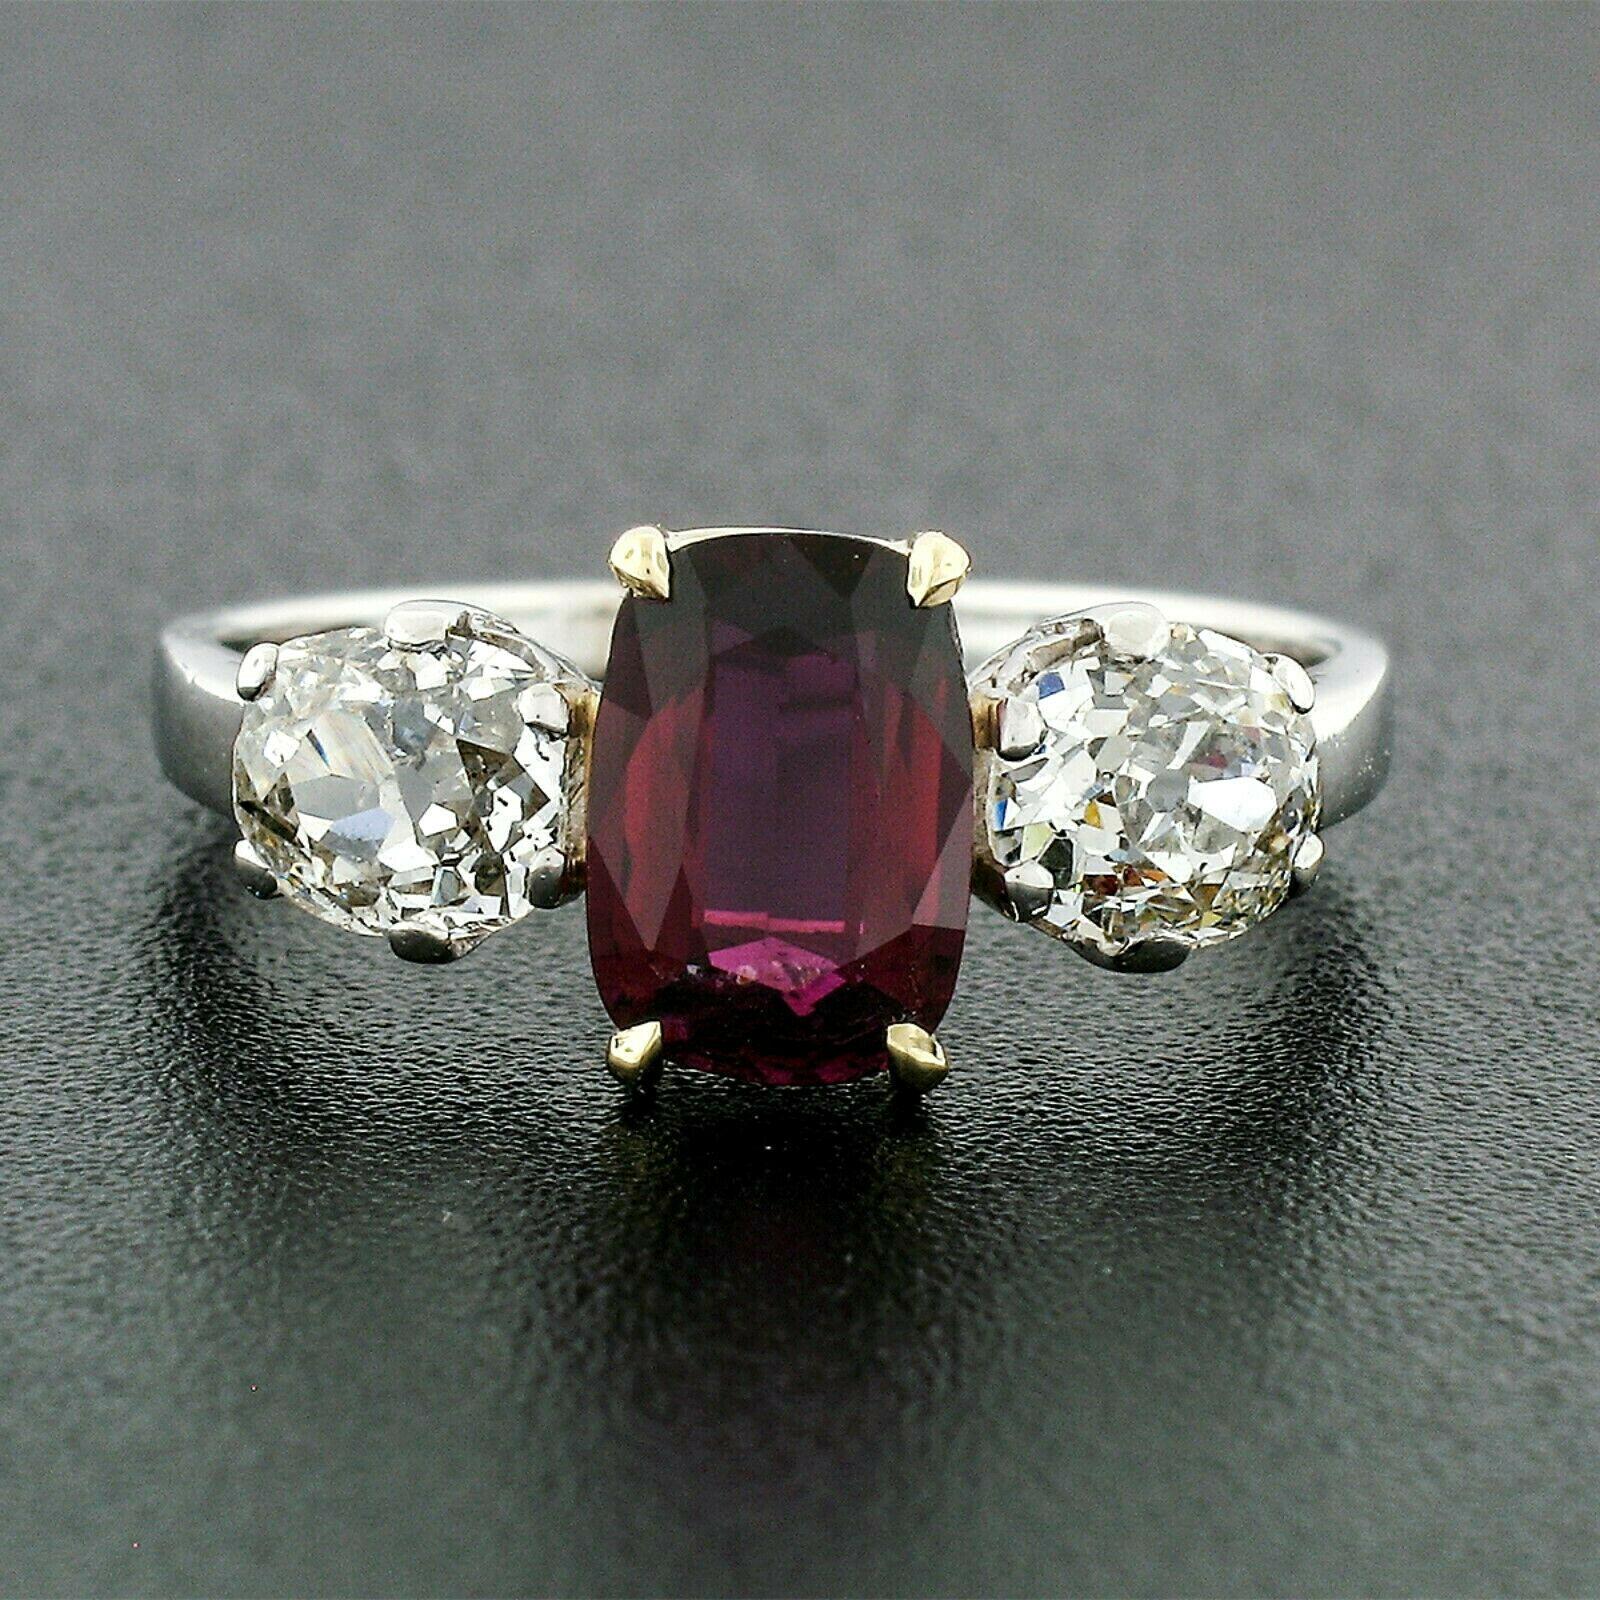 You're looking at a truly breathtaking antique 3-stone ring that was crafted from solid .900 platinum and 14k yellow gold during the art deco period. The center stone is a 1.64 carat, GIA certified, natural ruby with no indications of heating. The